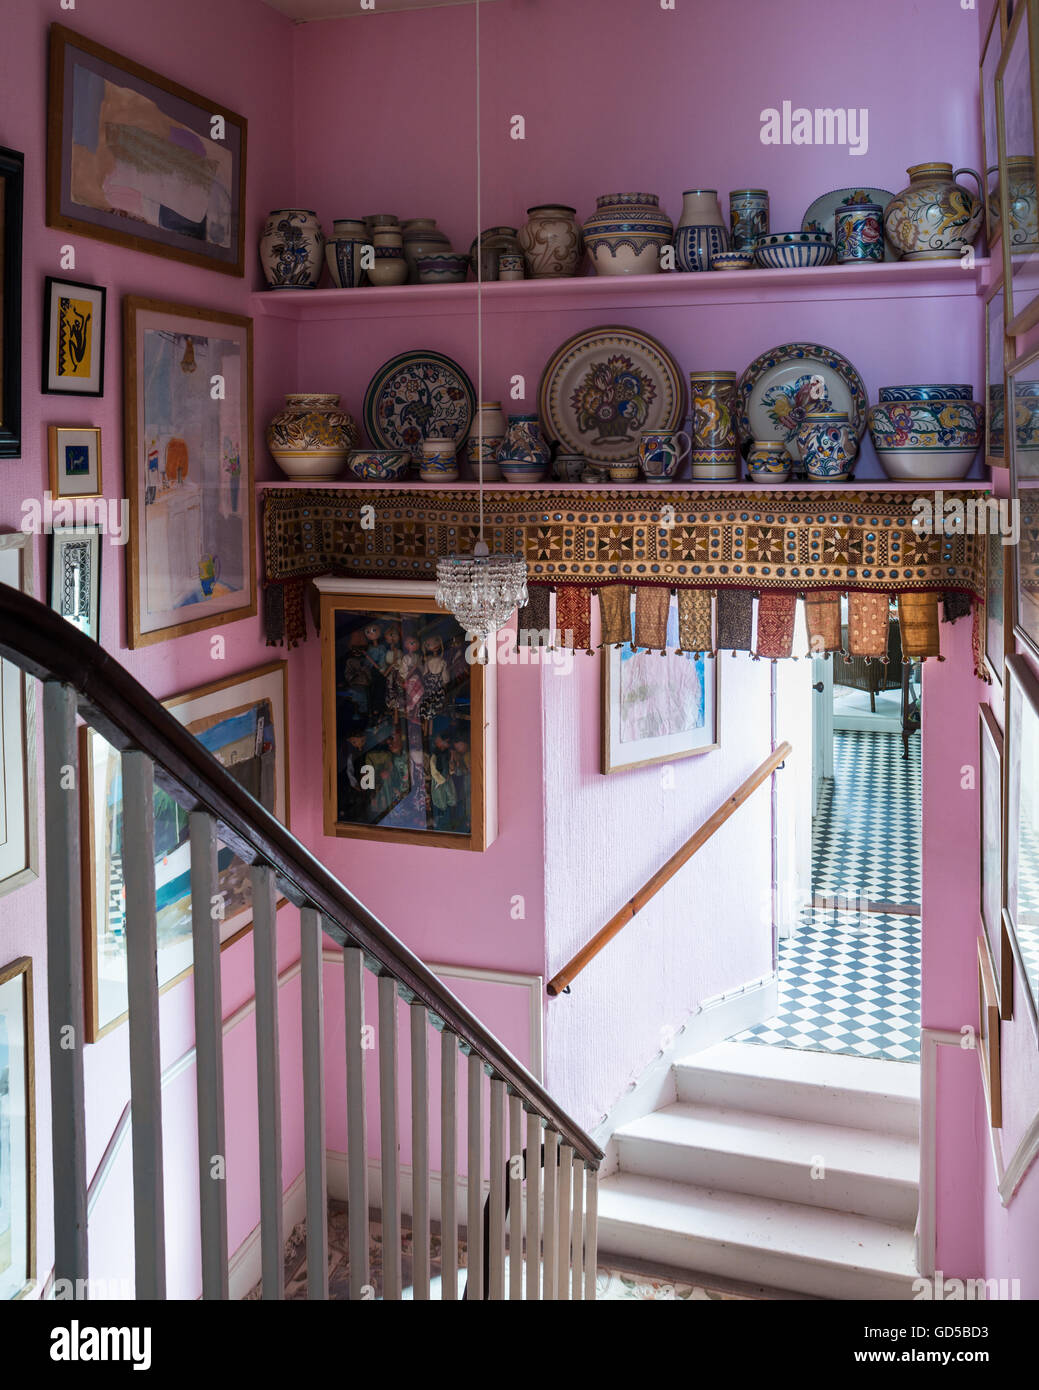 Collection of Poole pottery on shelves in pink stairwell with assorted artwork on walls Stock Photo